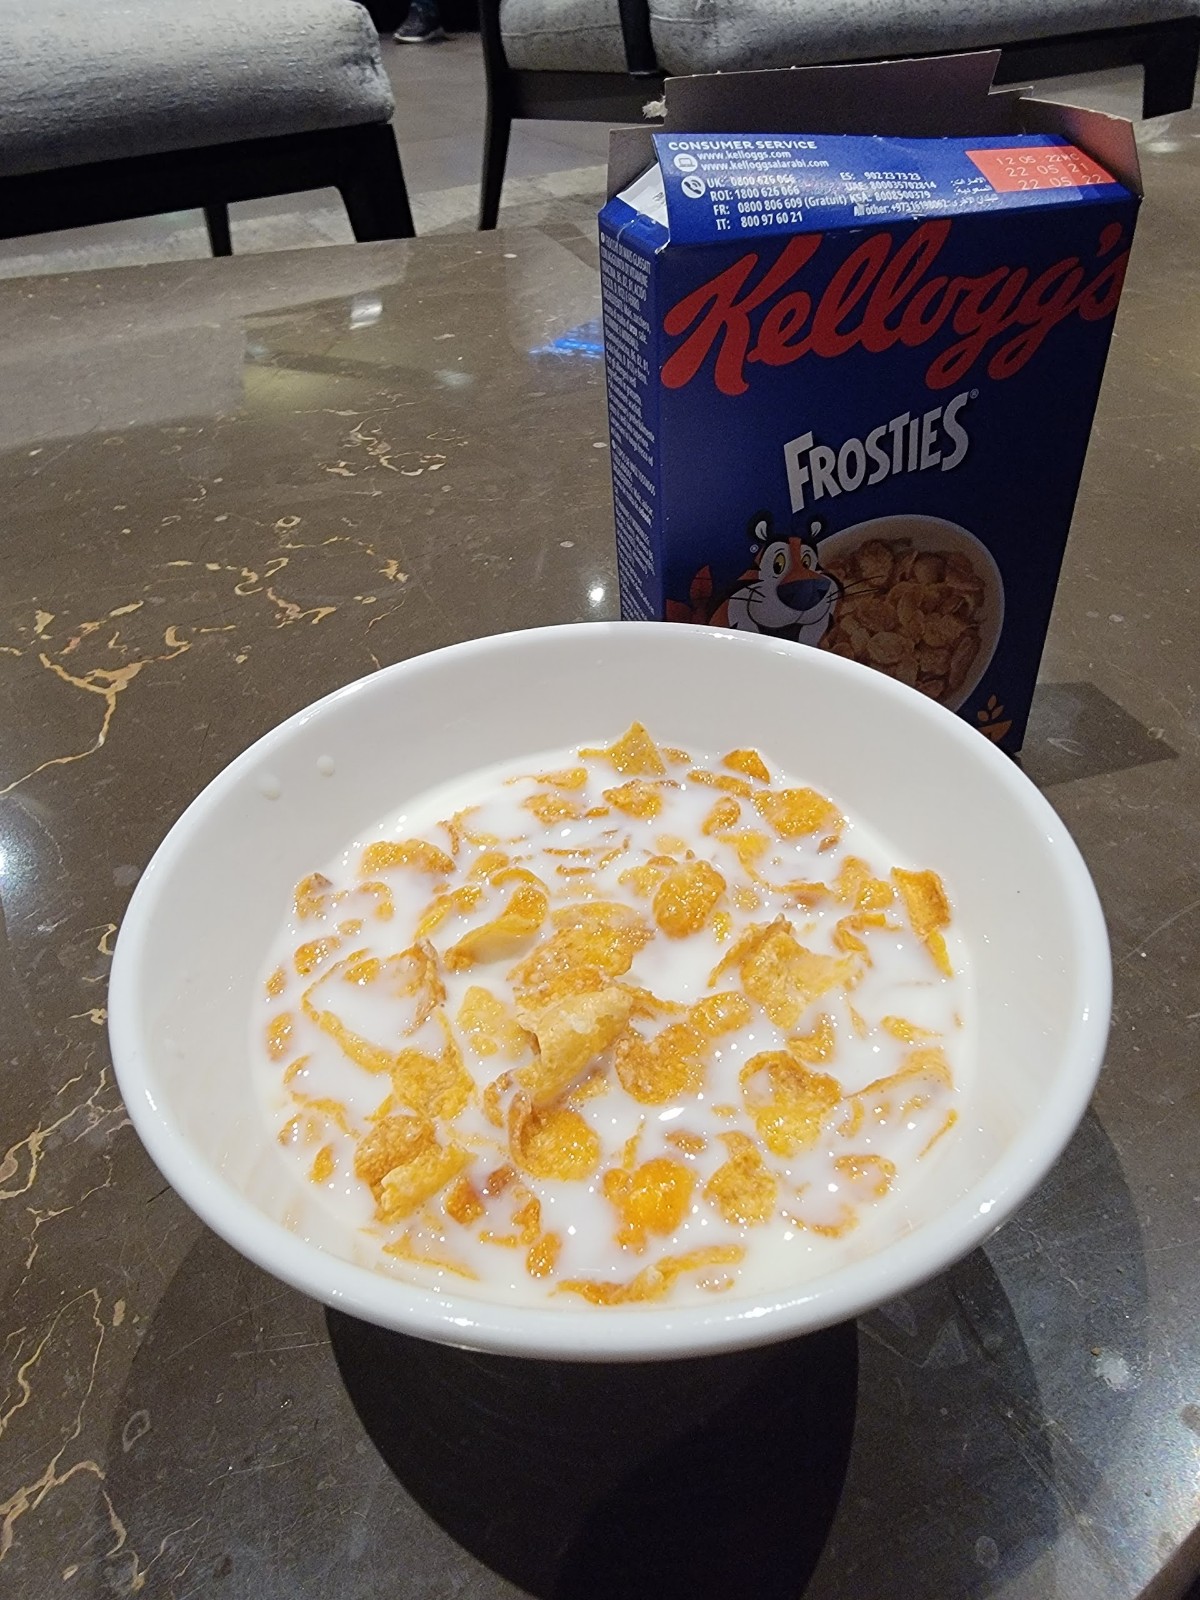 a bowl of cereal with milk and a box of cereal